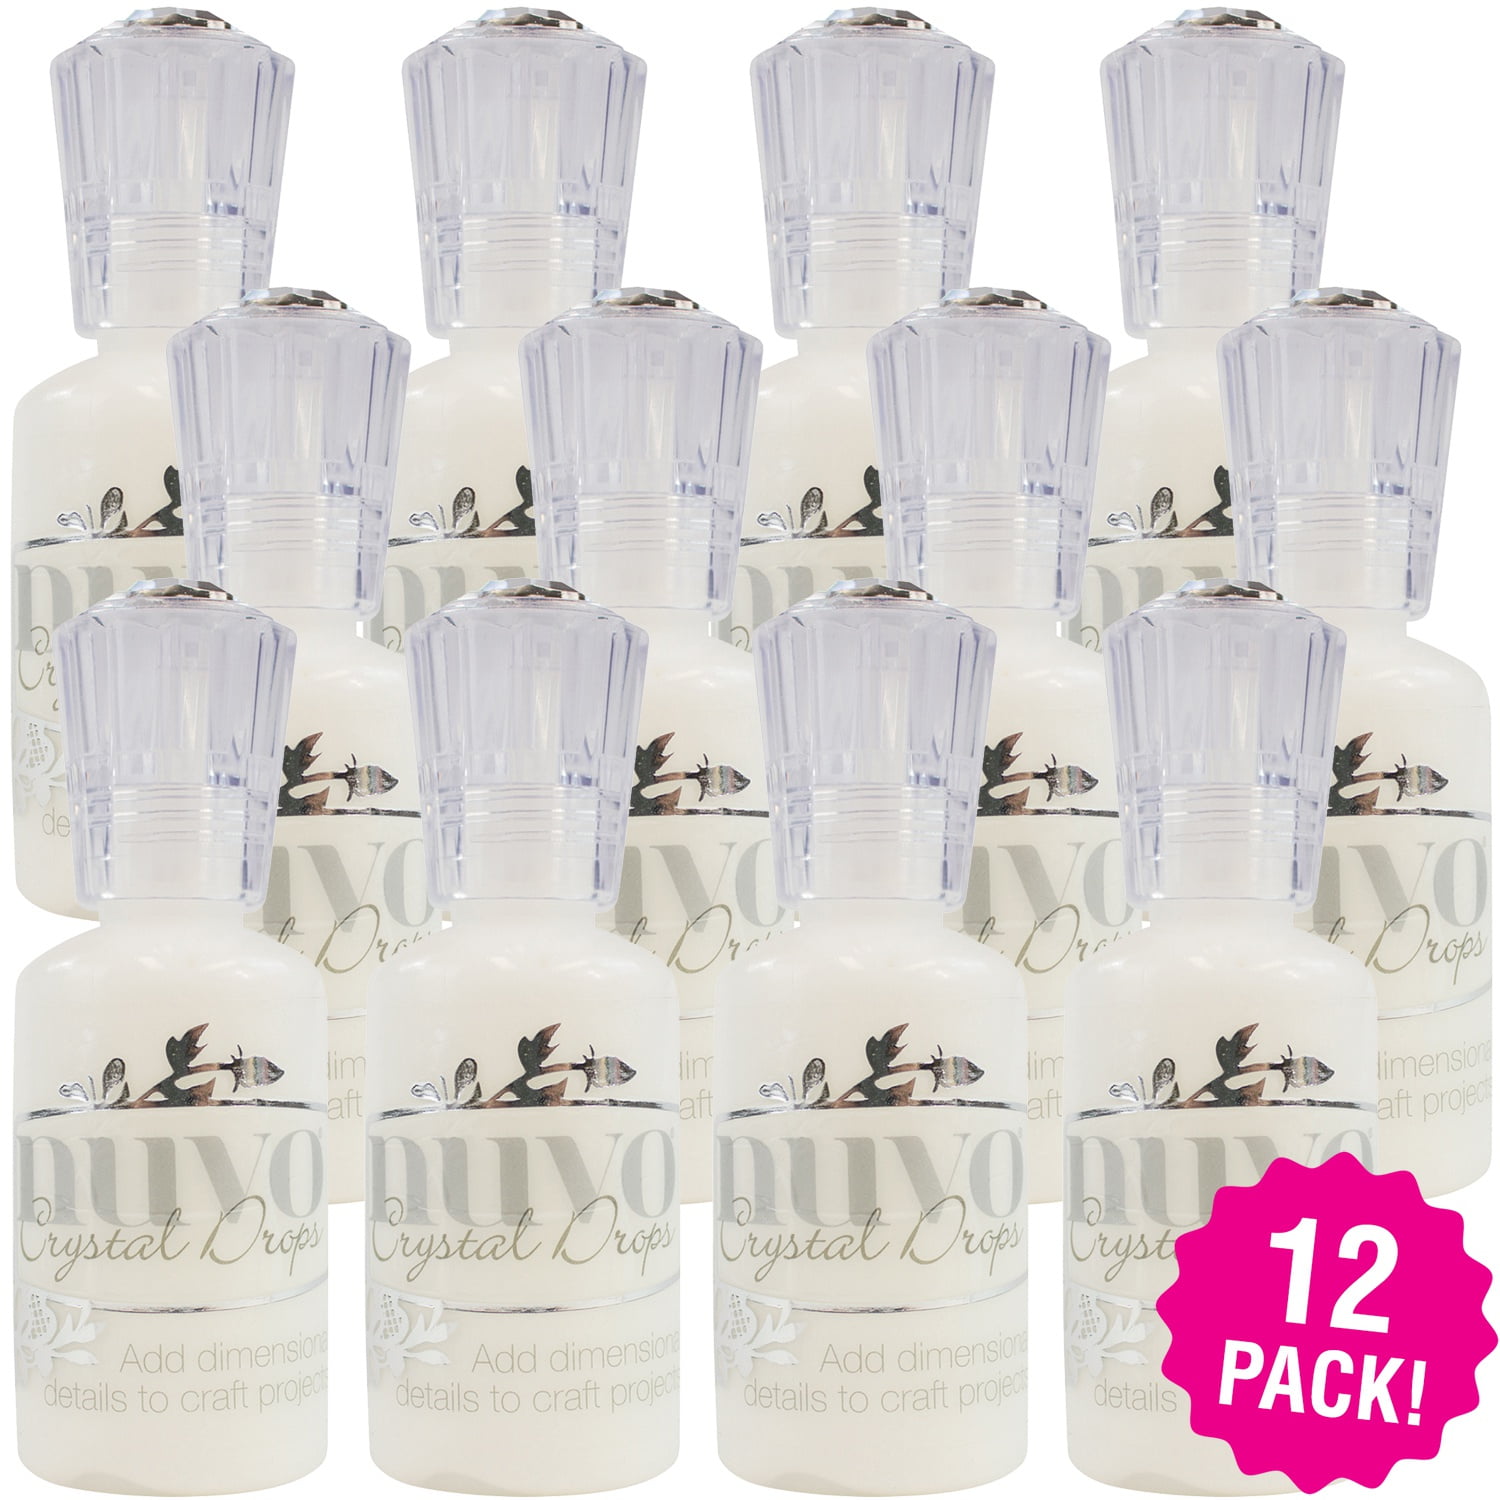 Nuvo Gloss White Crystal Drops 1.1oz, Multipack of 12 